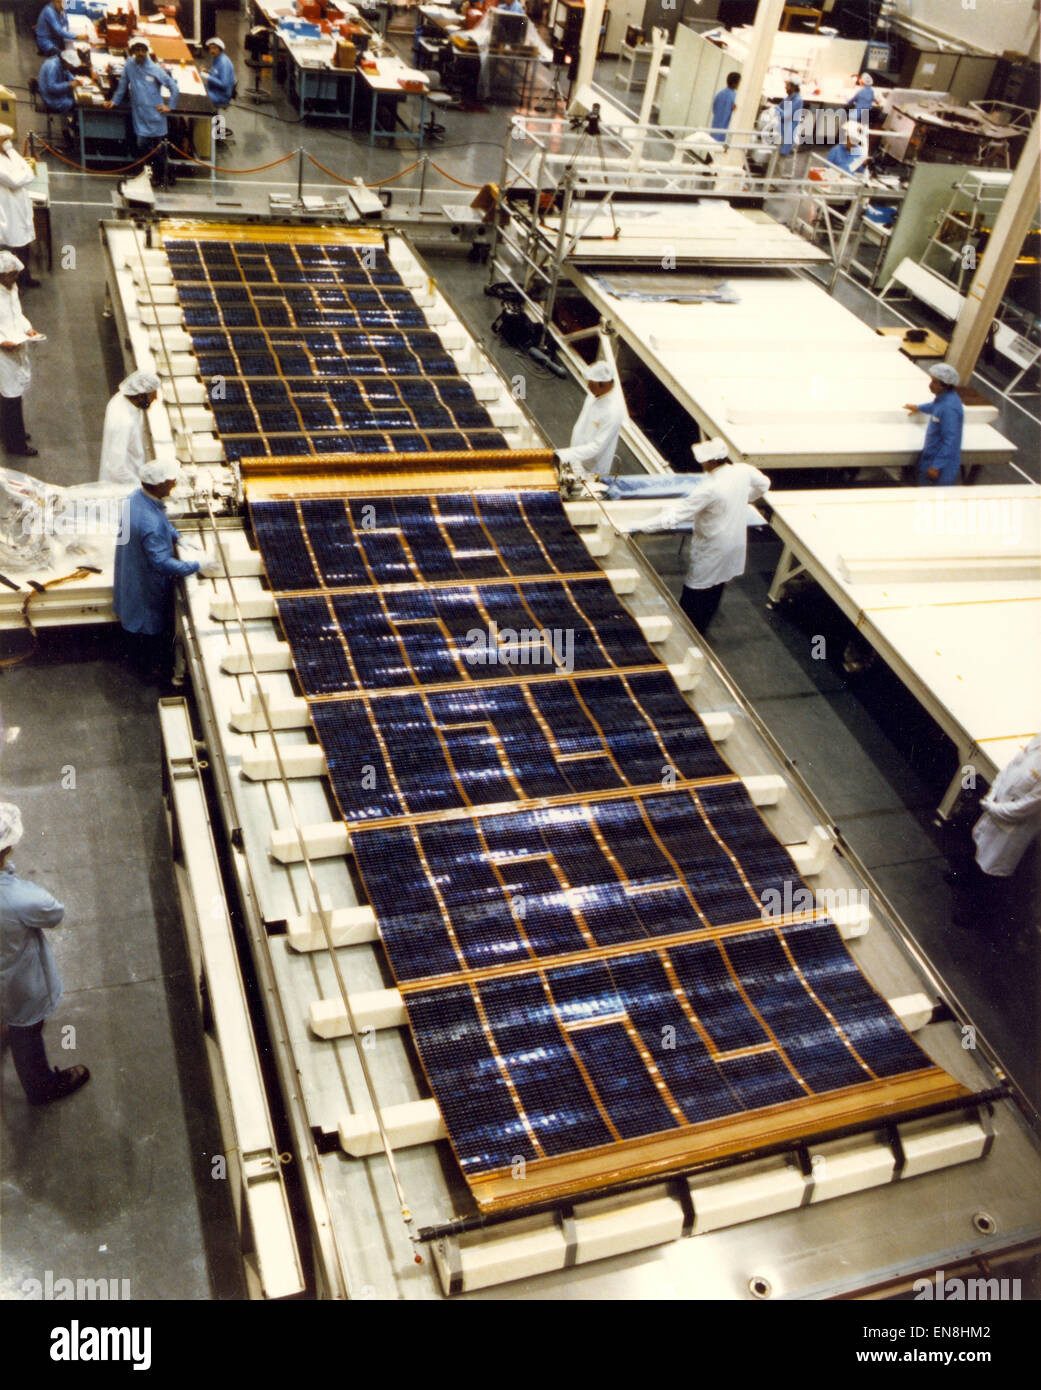 The Hubble Space Telescope is powered by huge solar arrays. To test the solar cell blankets, engineers deployed them on a water table. The arrays are mounted on opposite sides of the telescope, on the forward shell of the Support Systems Module. Each array stands on a 4-foot mast that supports a retractable wing of solar panels 40-feet (12.1-meters) long and 8.2-feet (2.5-meters) wide, in full extension. The arrays rotate so that the solar cells face the Sun as much as possible to harness the Sun's energy. The solar arrays were designed to be replaced in orbit. (NASA/MSFC Image) Stock Photo